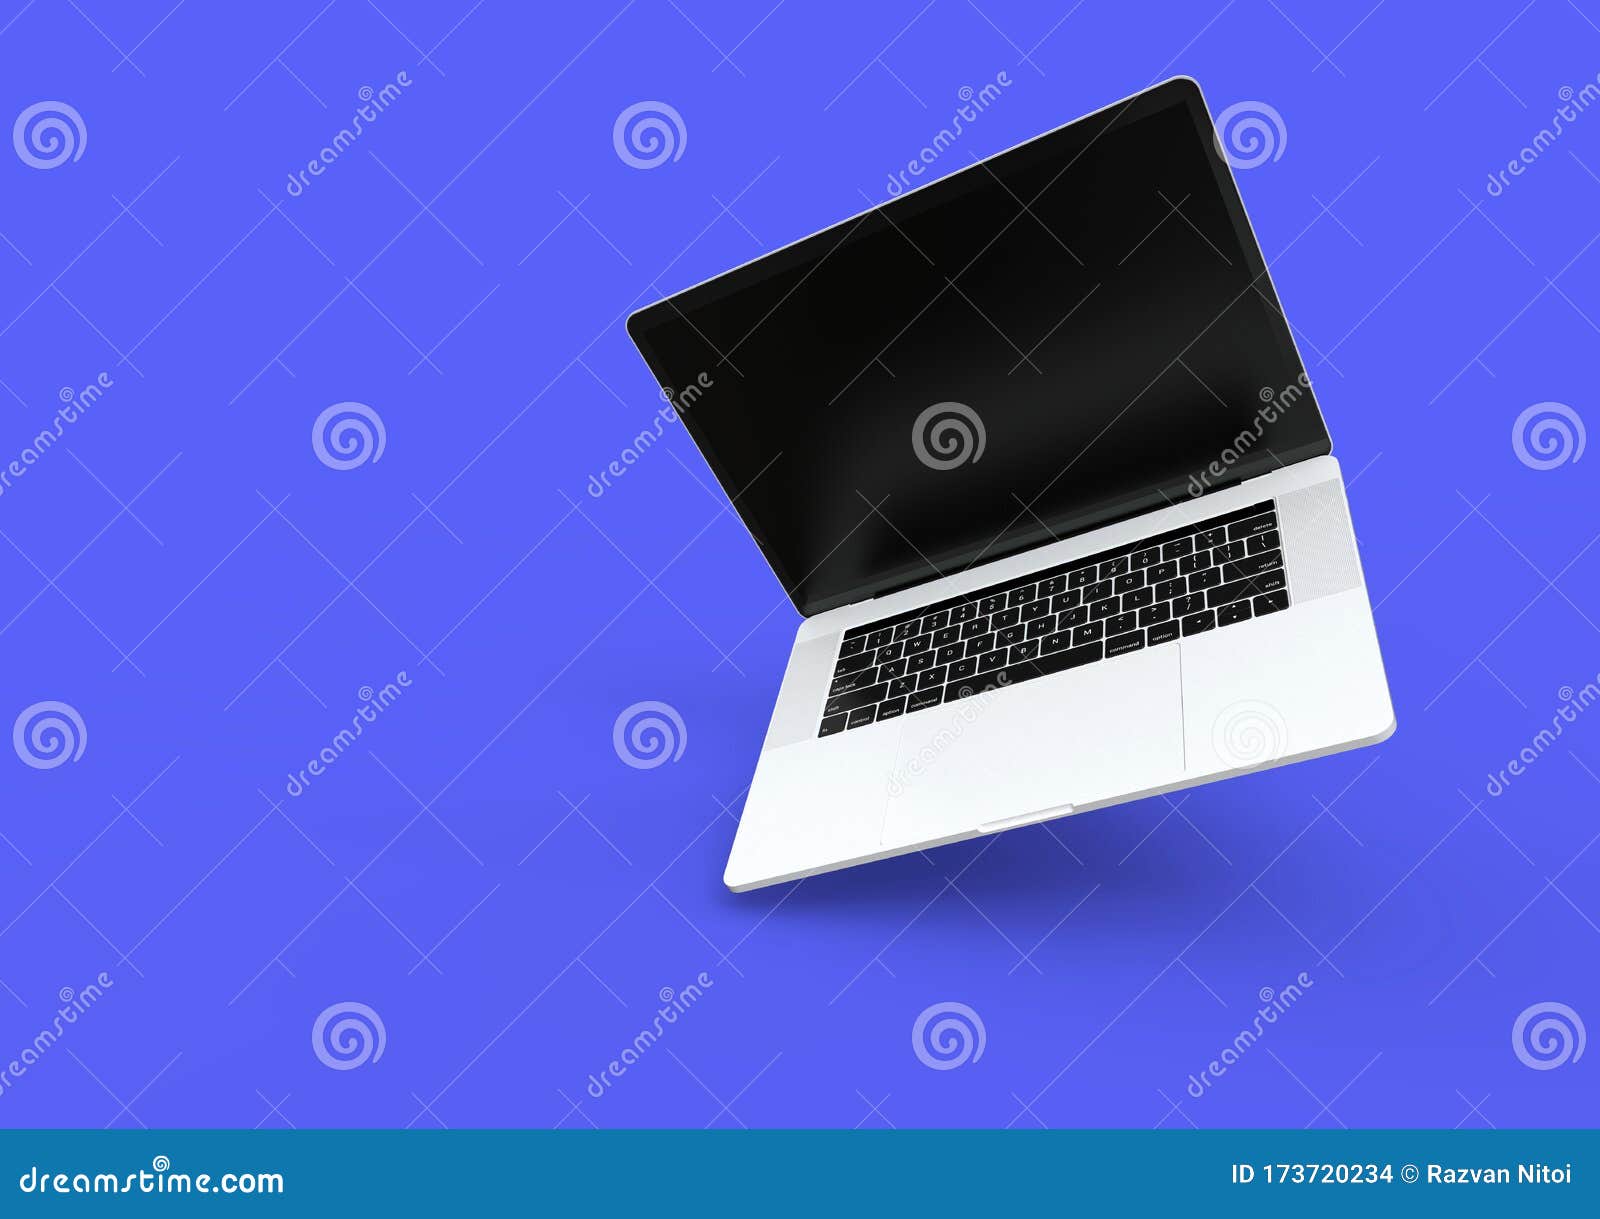 laptop computer, macbook pro style, colorful background